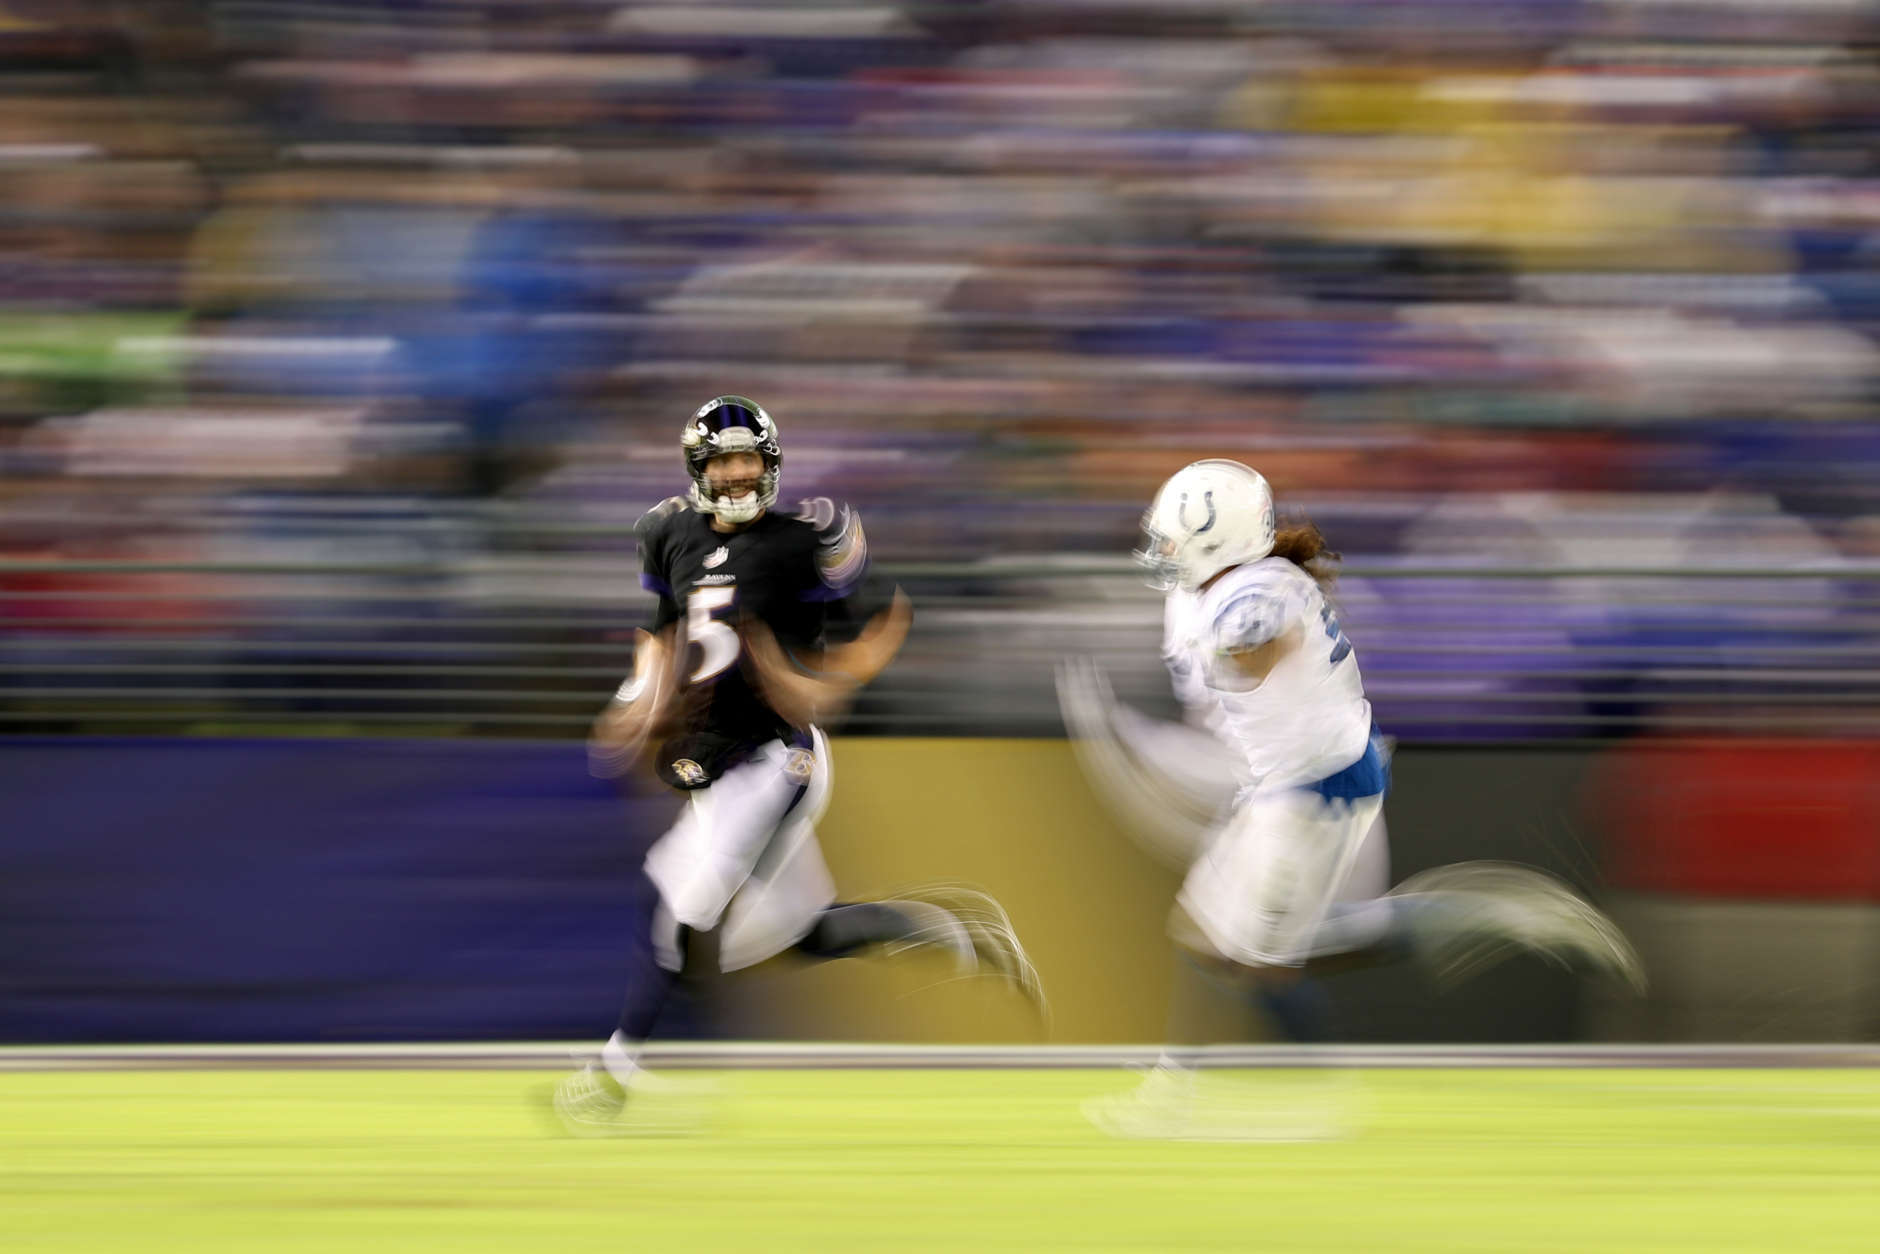 BALTIMORE, MD - DECEMBER 23: Quarterback Joe Flacco #5 of the Baltimore Ravens runs with the ball in the third quarter against the Indianapolis Colts at M&amp;T Bank Stadium on December 23, 2017 in Baltimore, Maryland. (Photo by Patrick Smith/Getty Images)